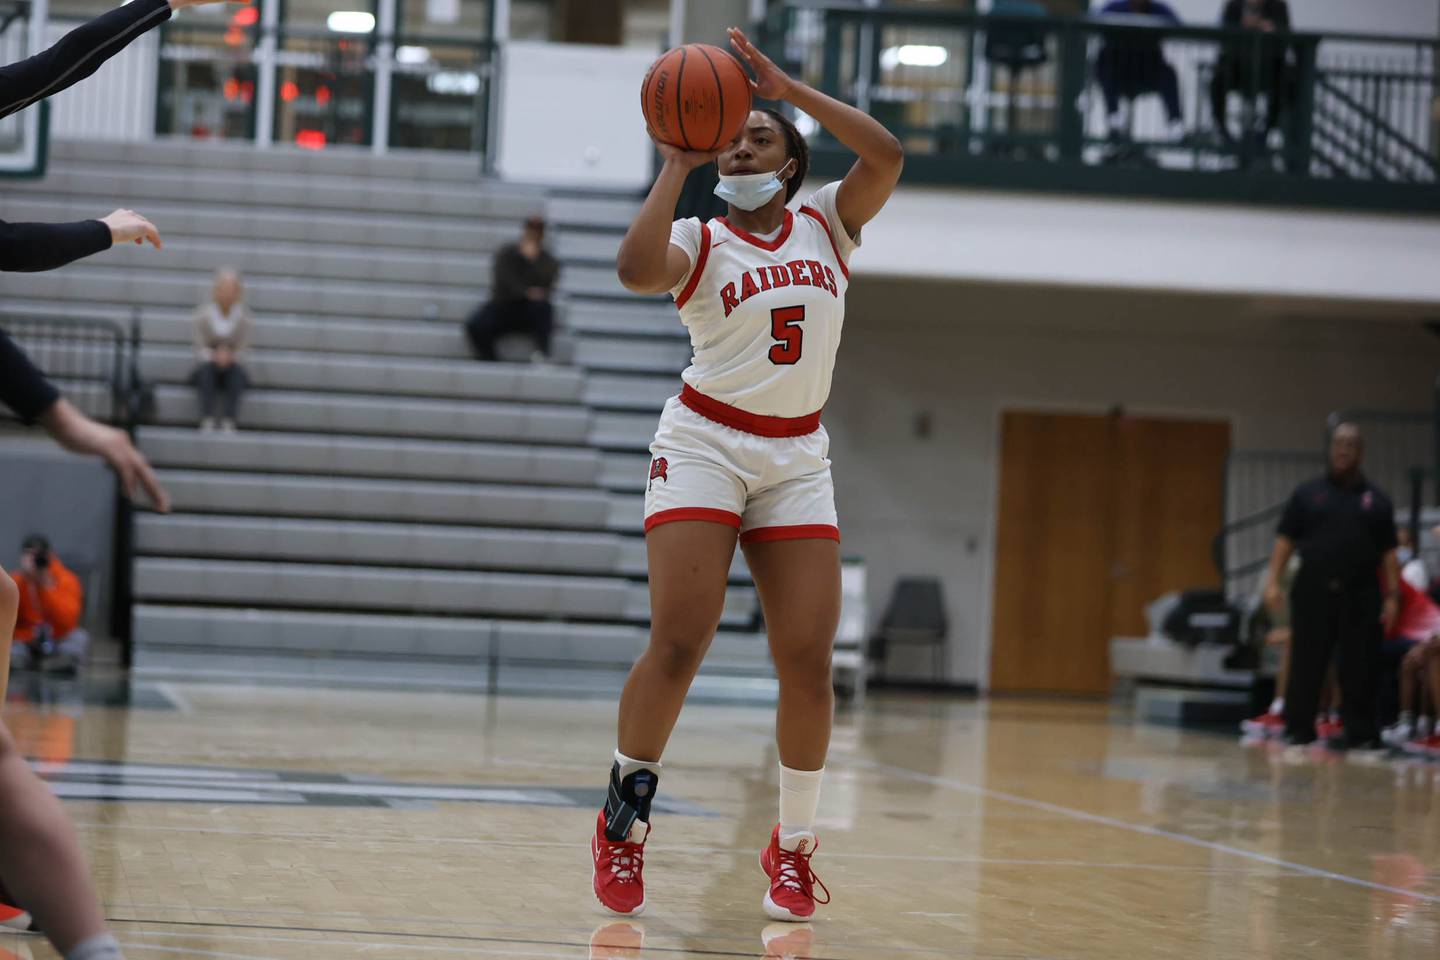 Bolingbrook’s Kennedi Perkins puts up the deep shot against Edwardsville in the Class 4A Illinois Wesleyan Super-sectional. Friday, Feb. 25, 2022, in Bloomington.